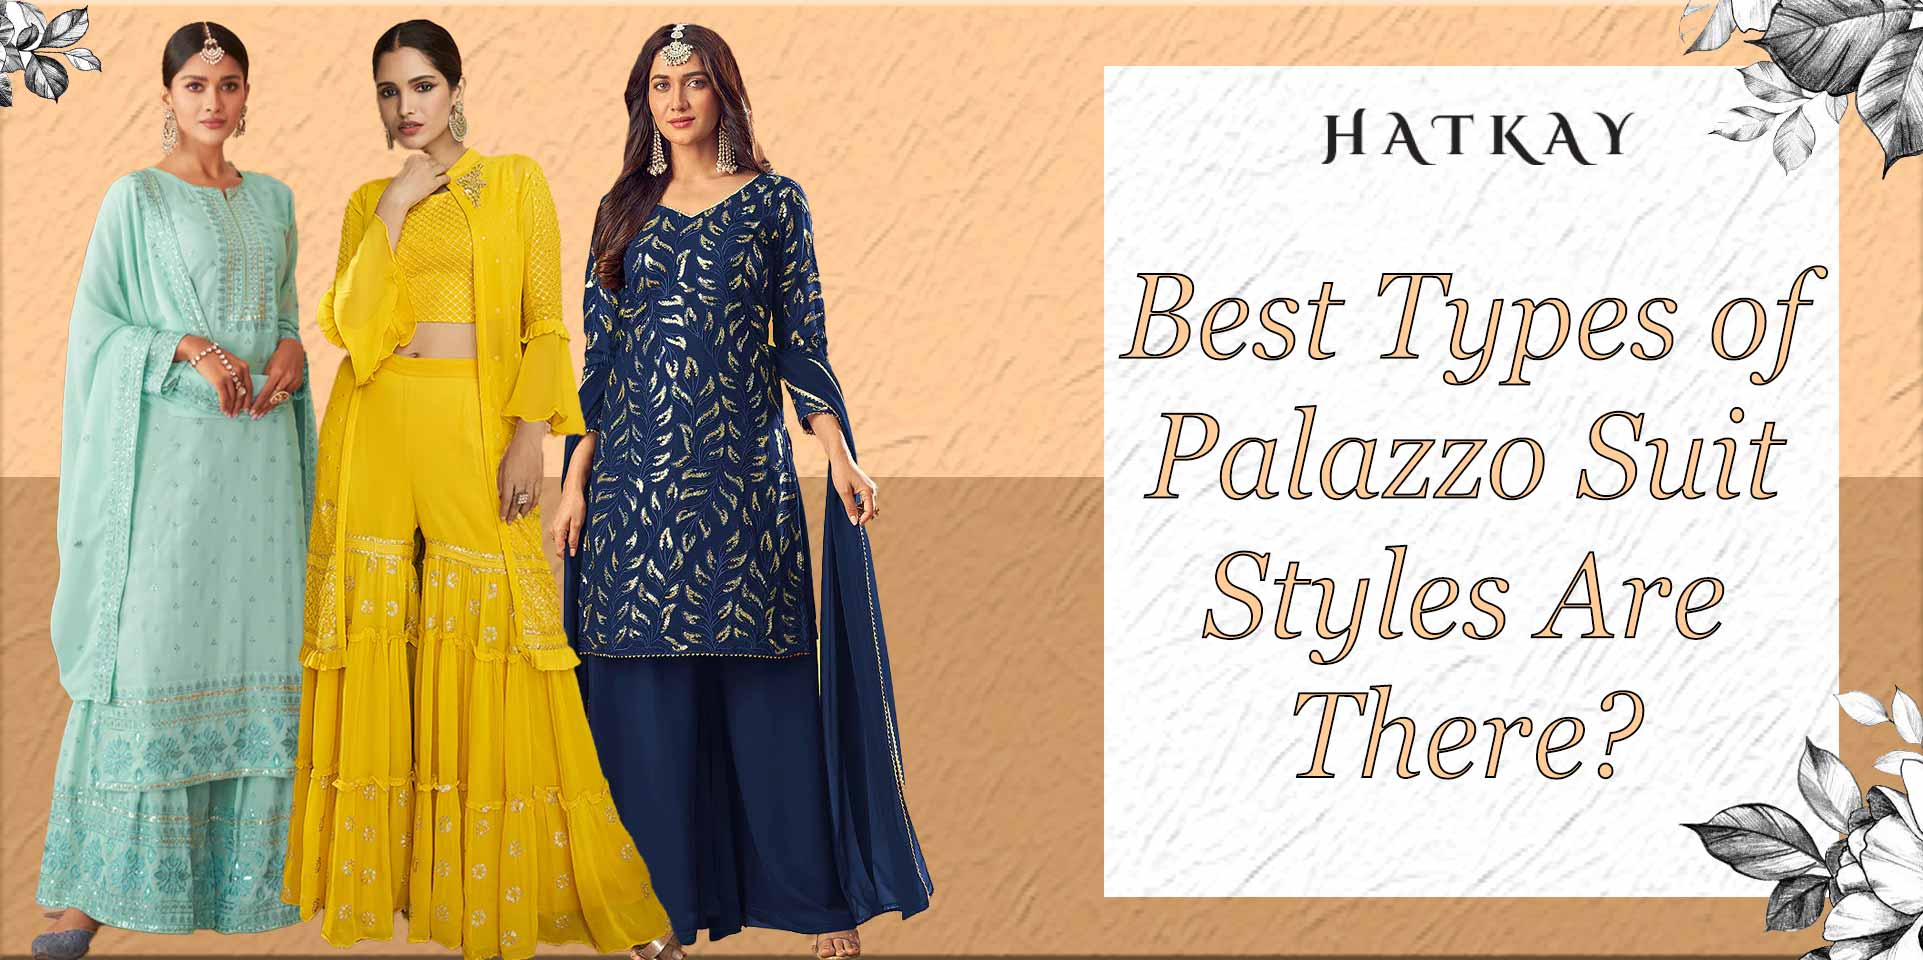 How Many Types of Palazzo Suit Styles are There? Which is the Best Palazzo Suit Style?